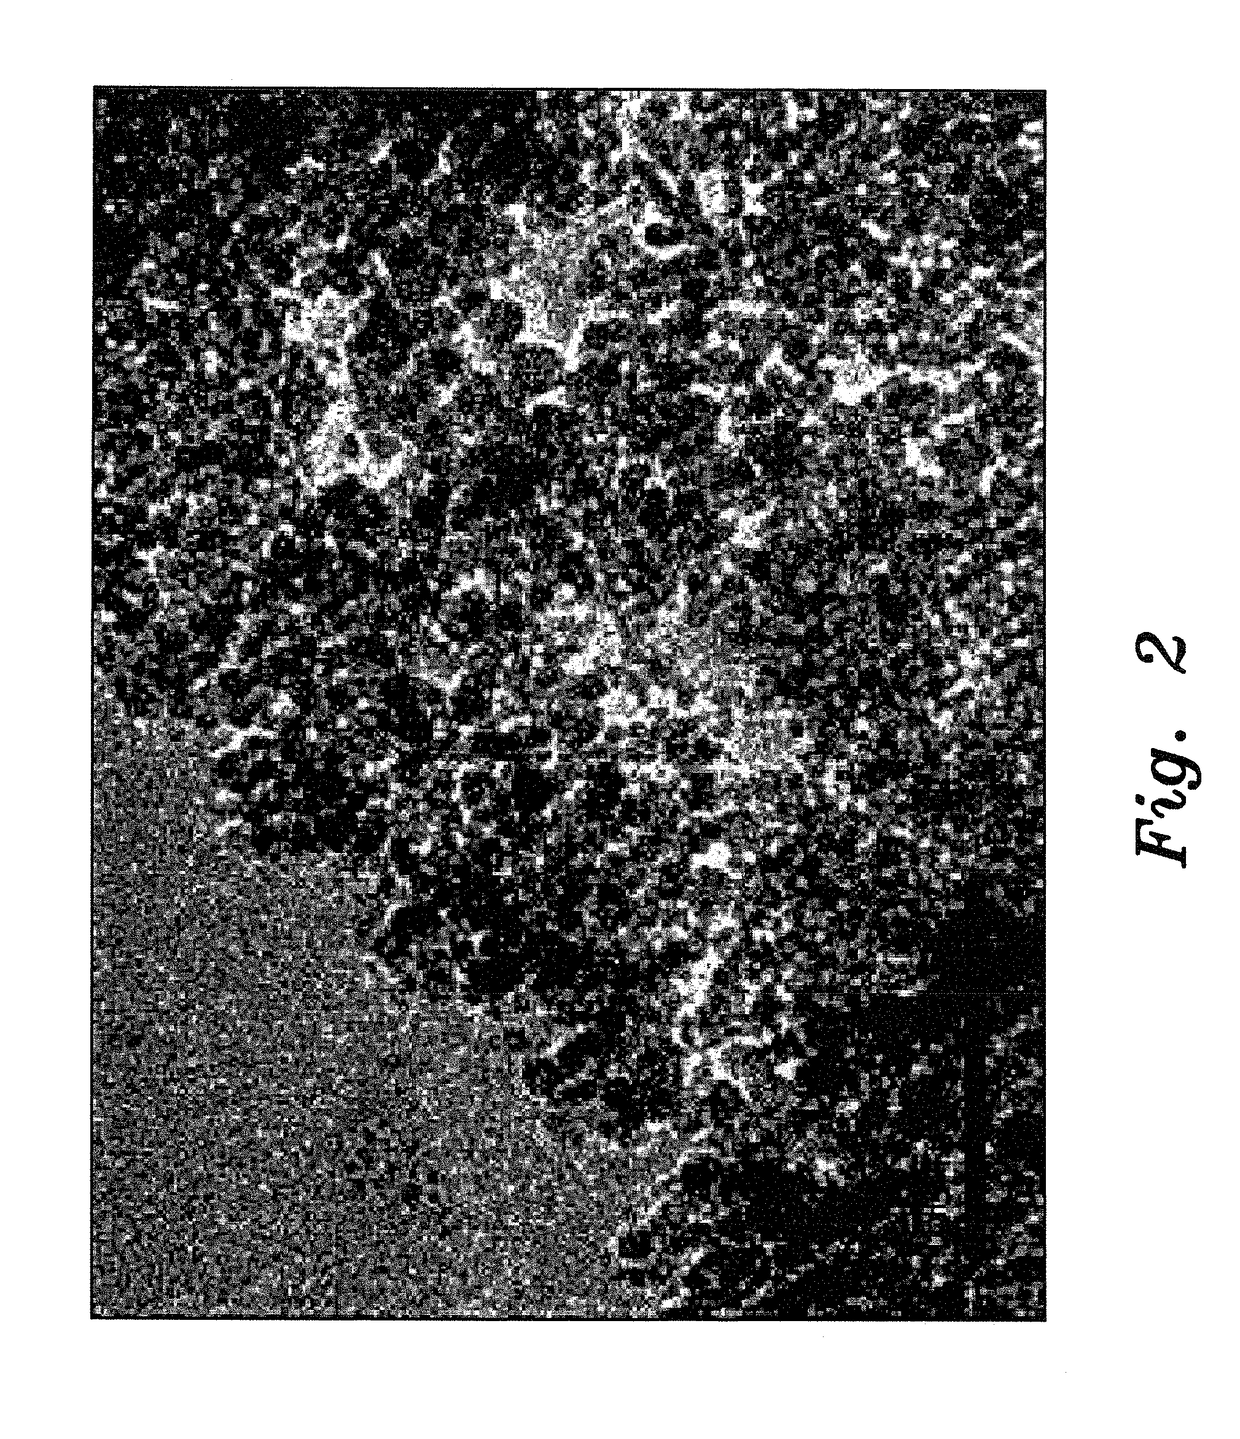 Method for preparing chitosan-coated magnetic nanoparticles for protein immobilization